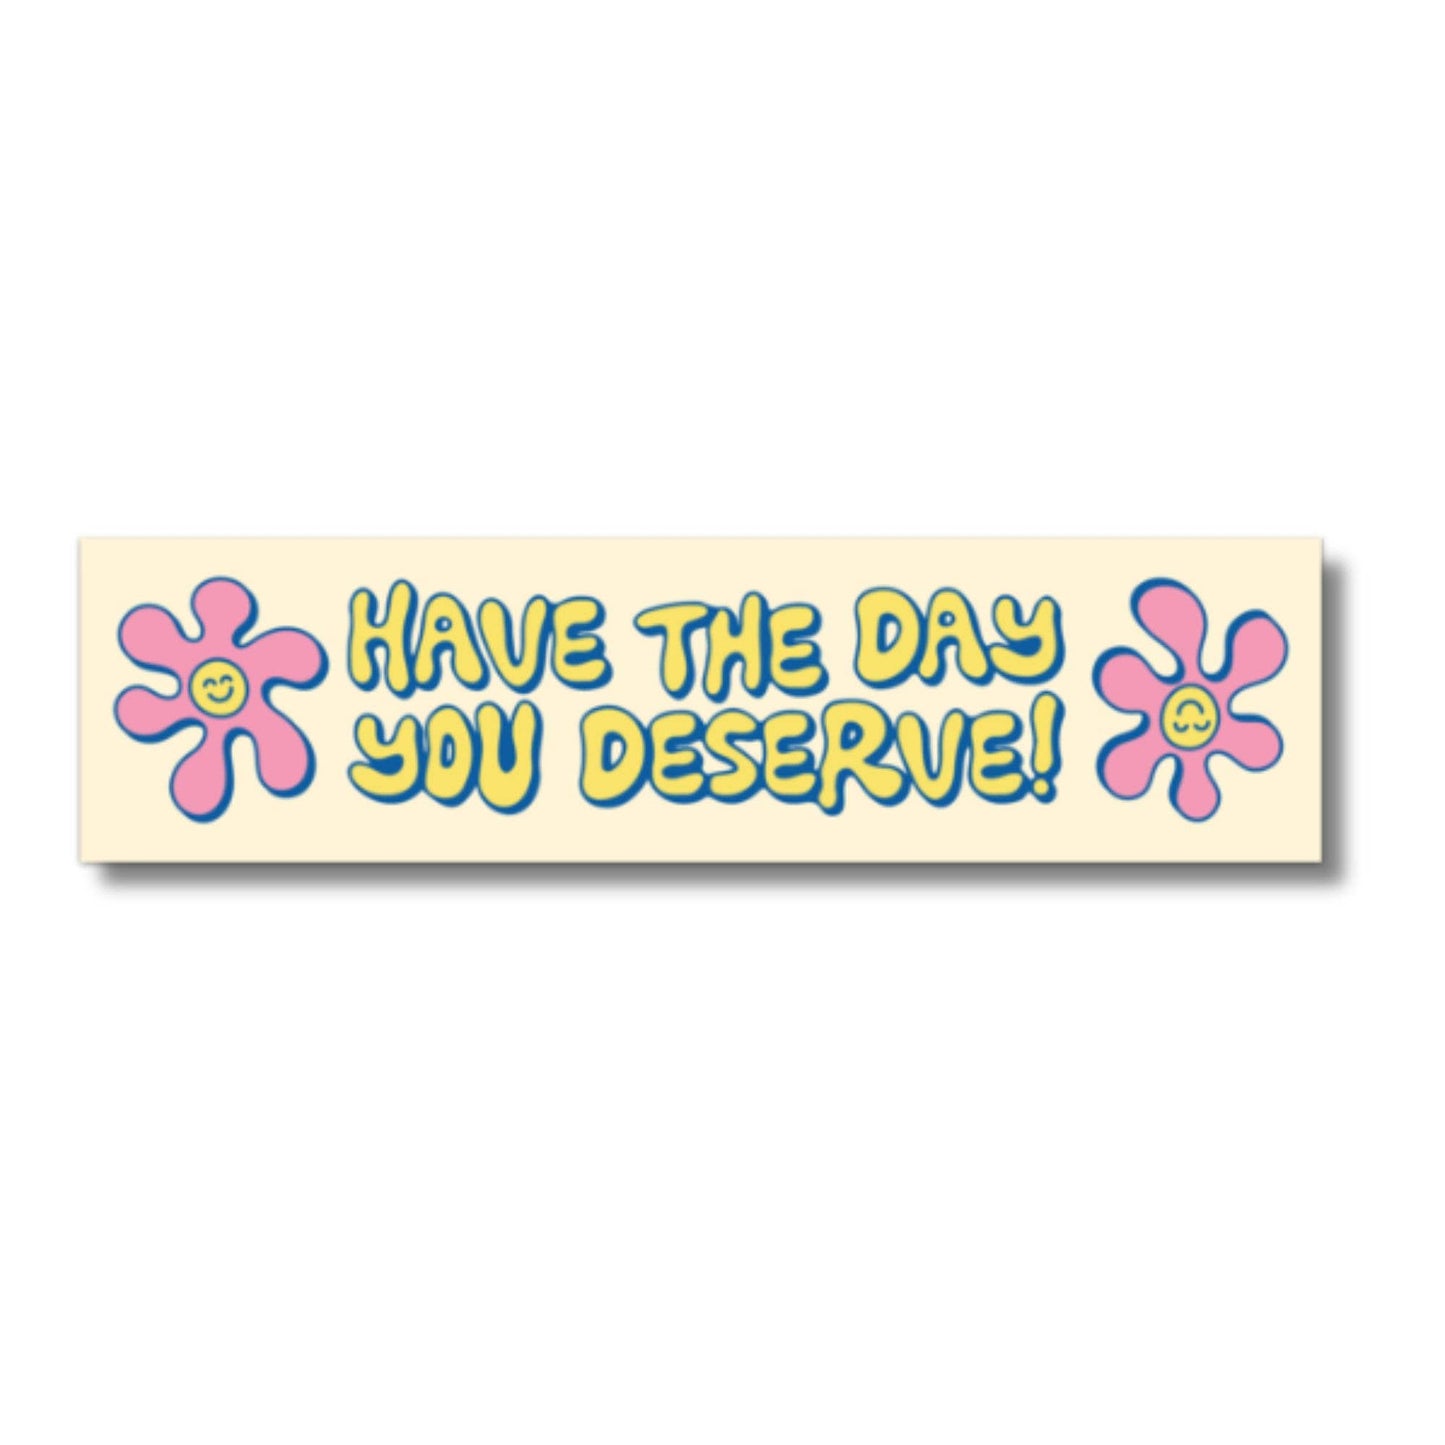 Have The Day You Deserve Car Sticker